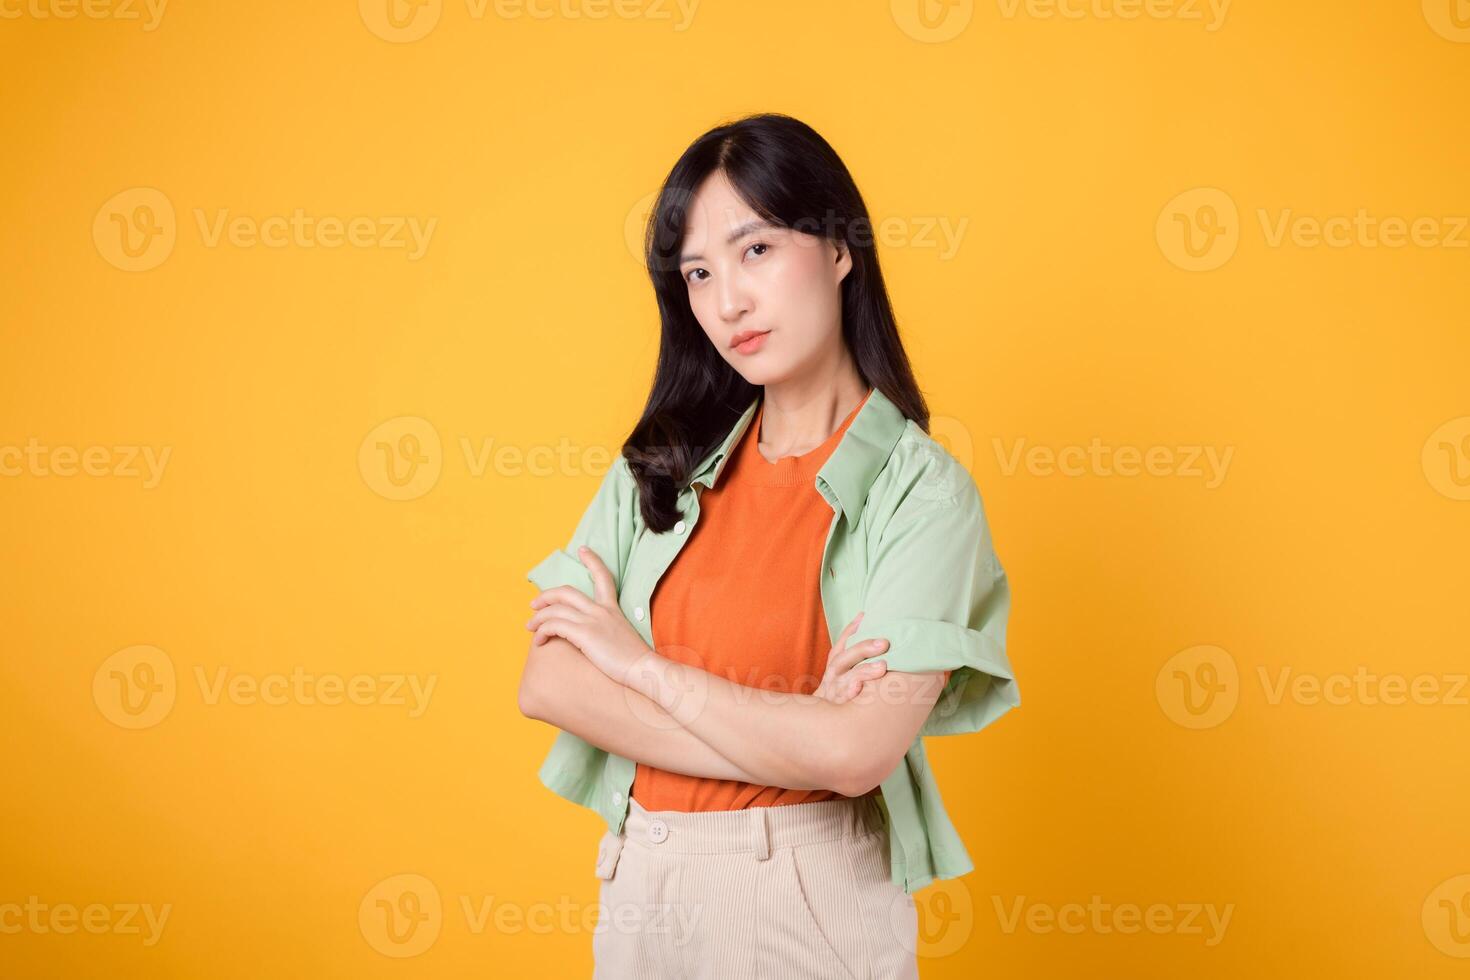 confidence and angry with a young Asian woman 30s wearing orange shirt. Her arm cross gesture on chest against a vibrant yellow background photo